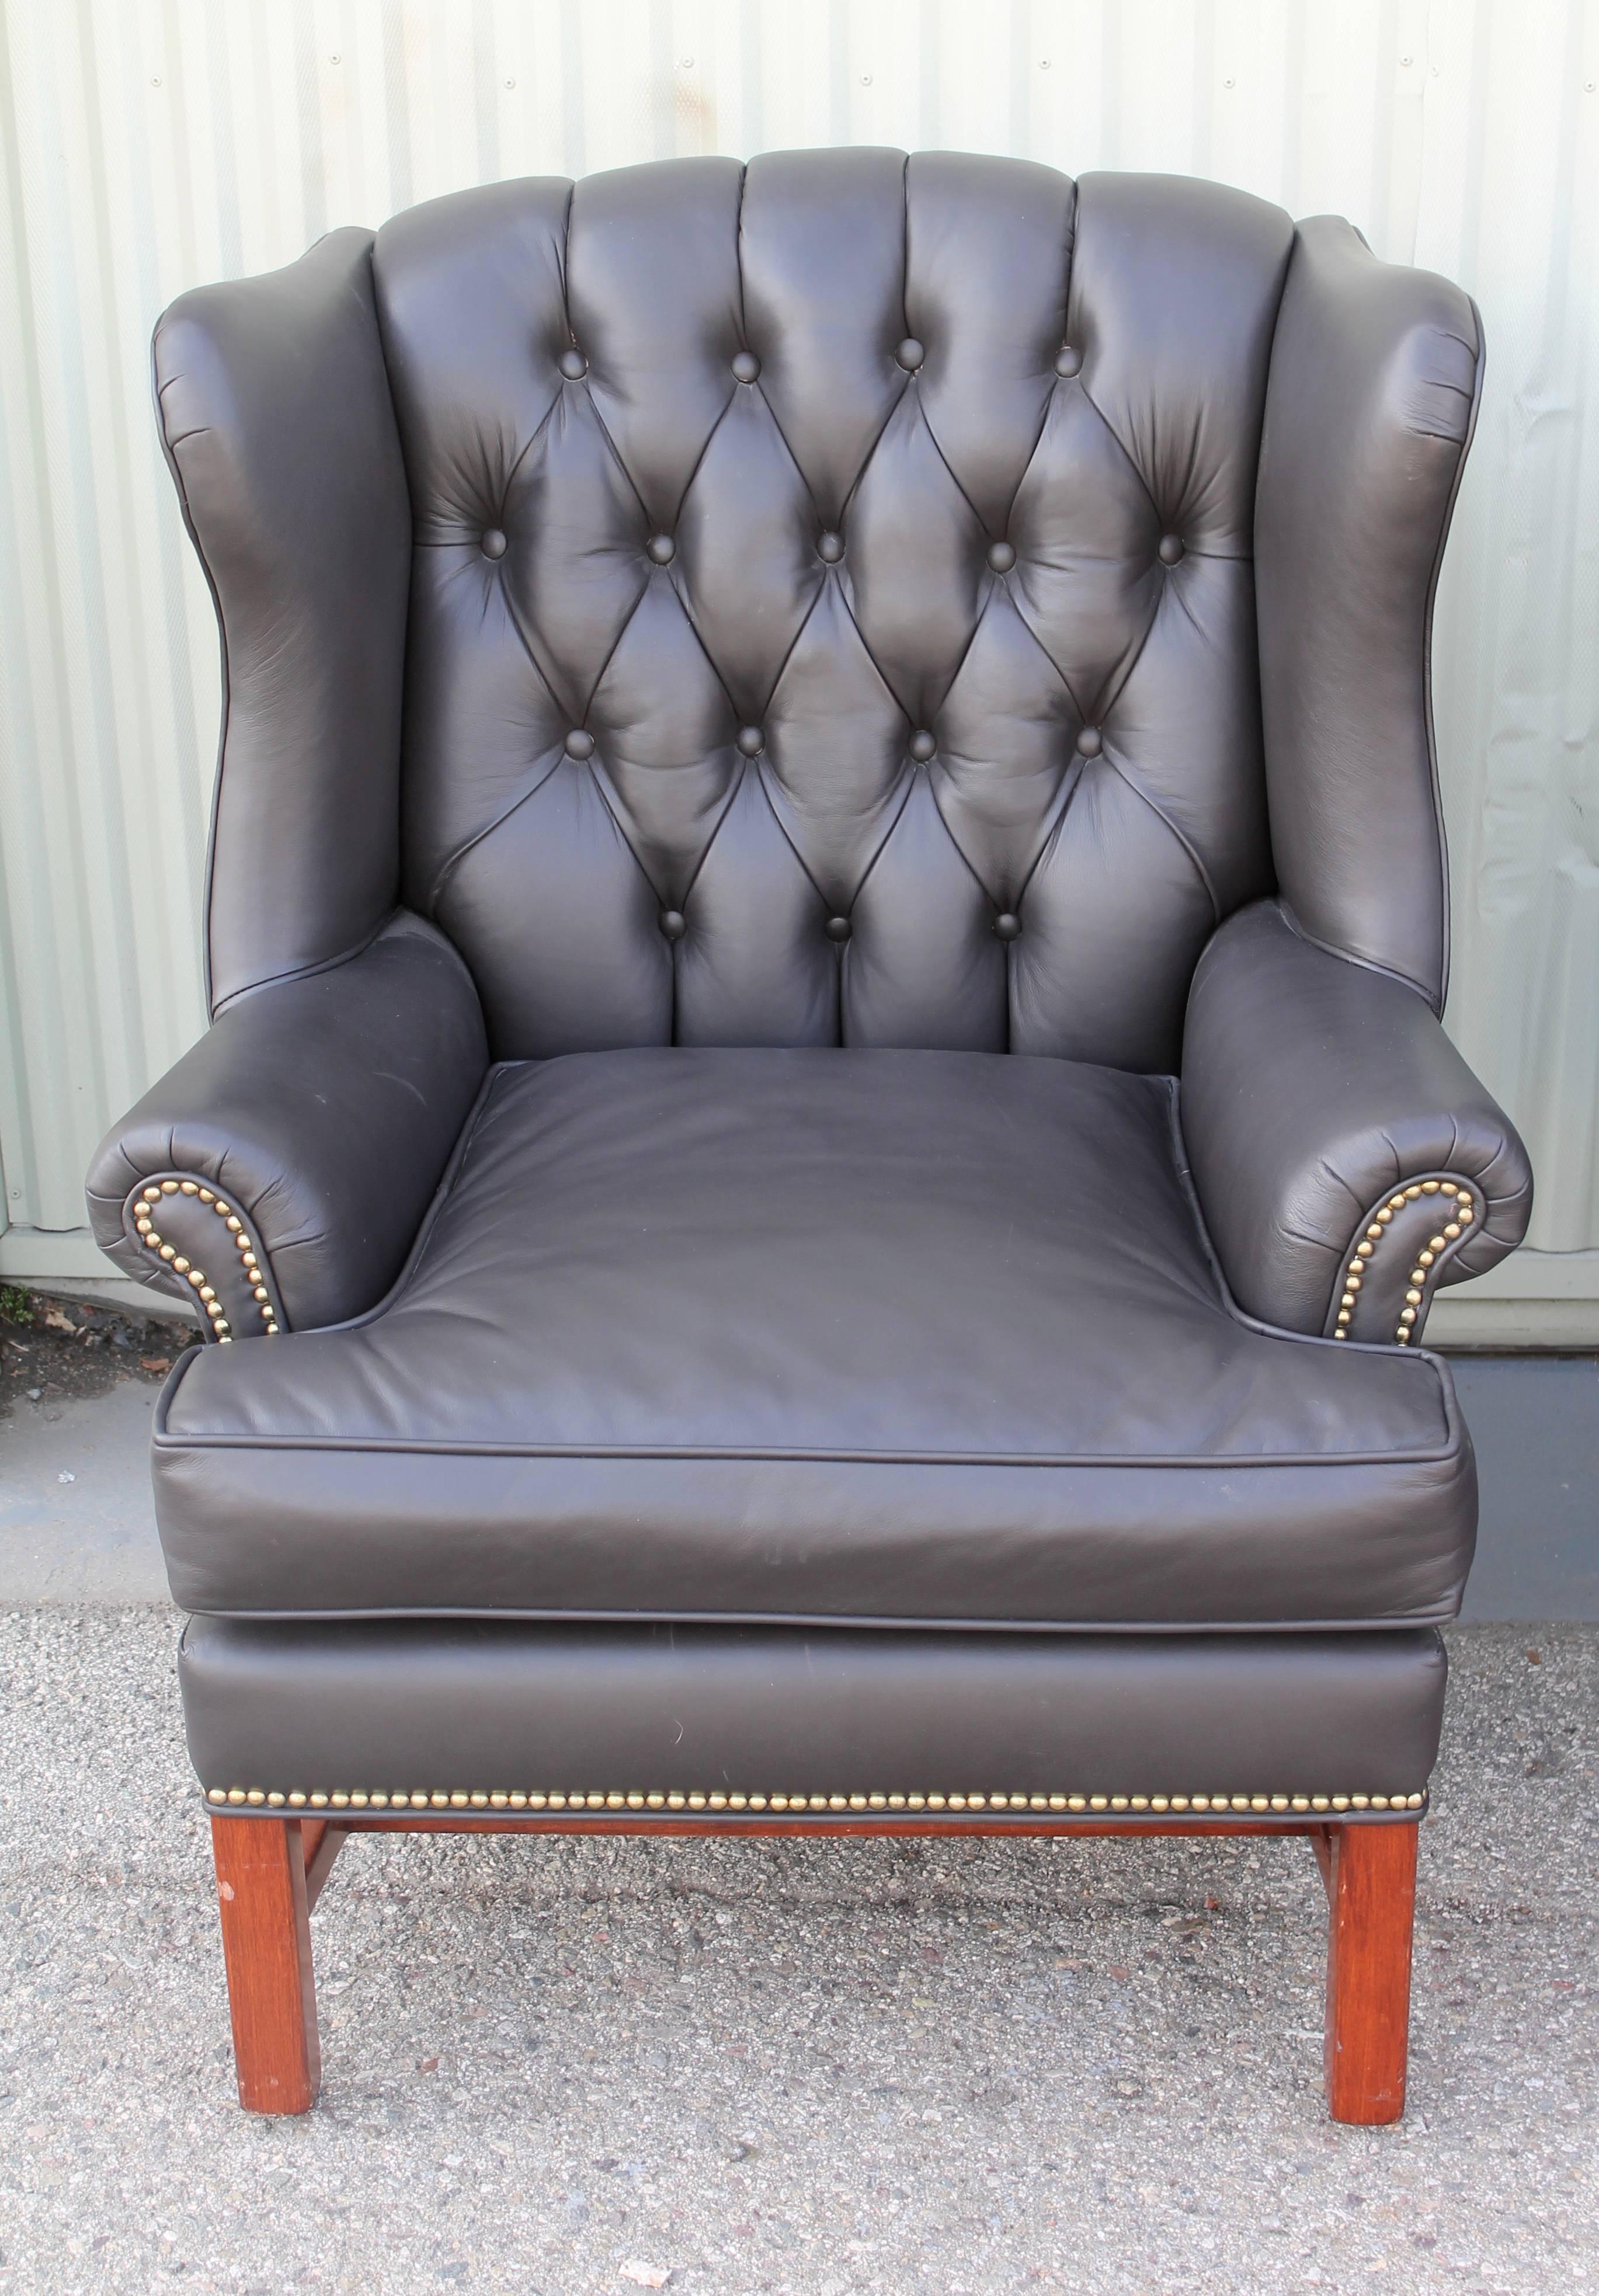 This fine pair of recovered soft Italian leather wing chairs are in fine condition. The brass studded trim raps around the entire chair. The chairs have the original makes label 